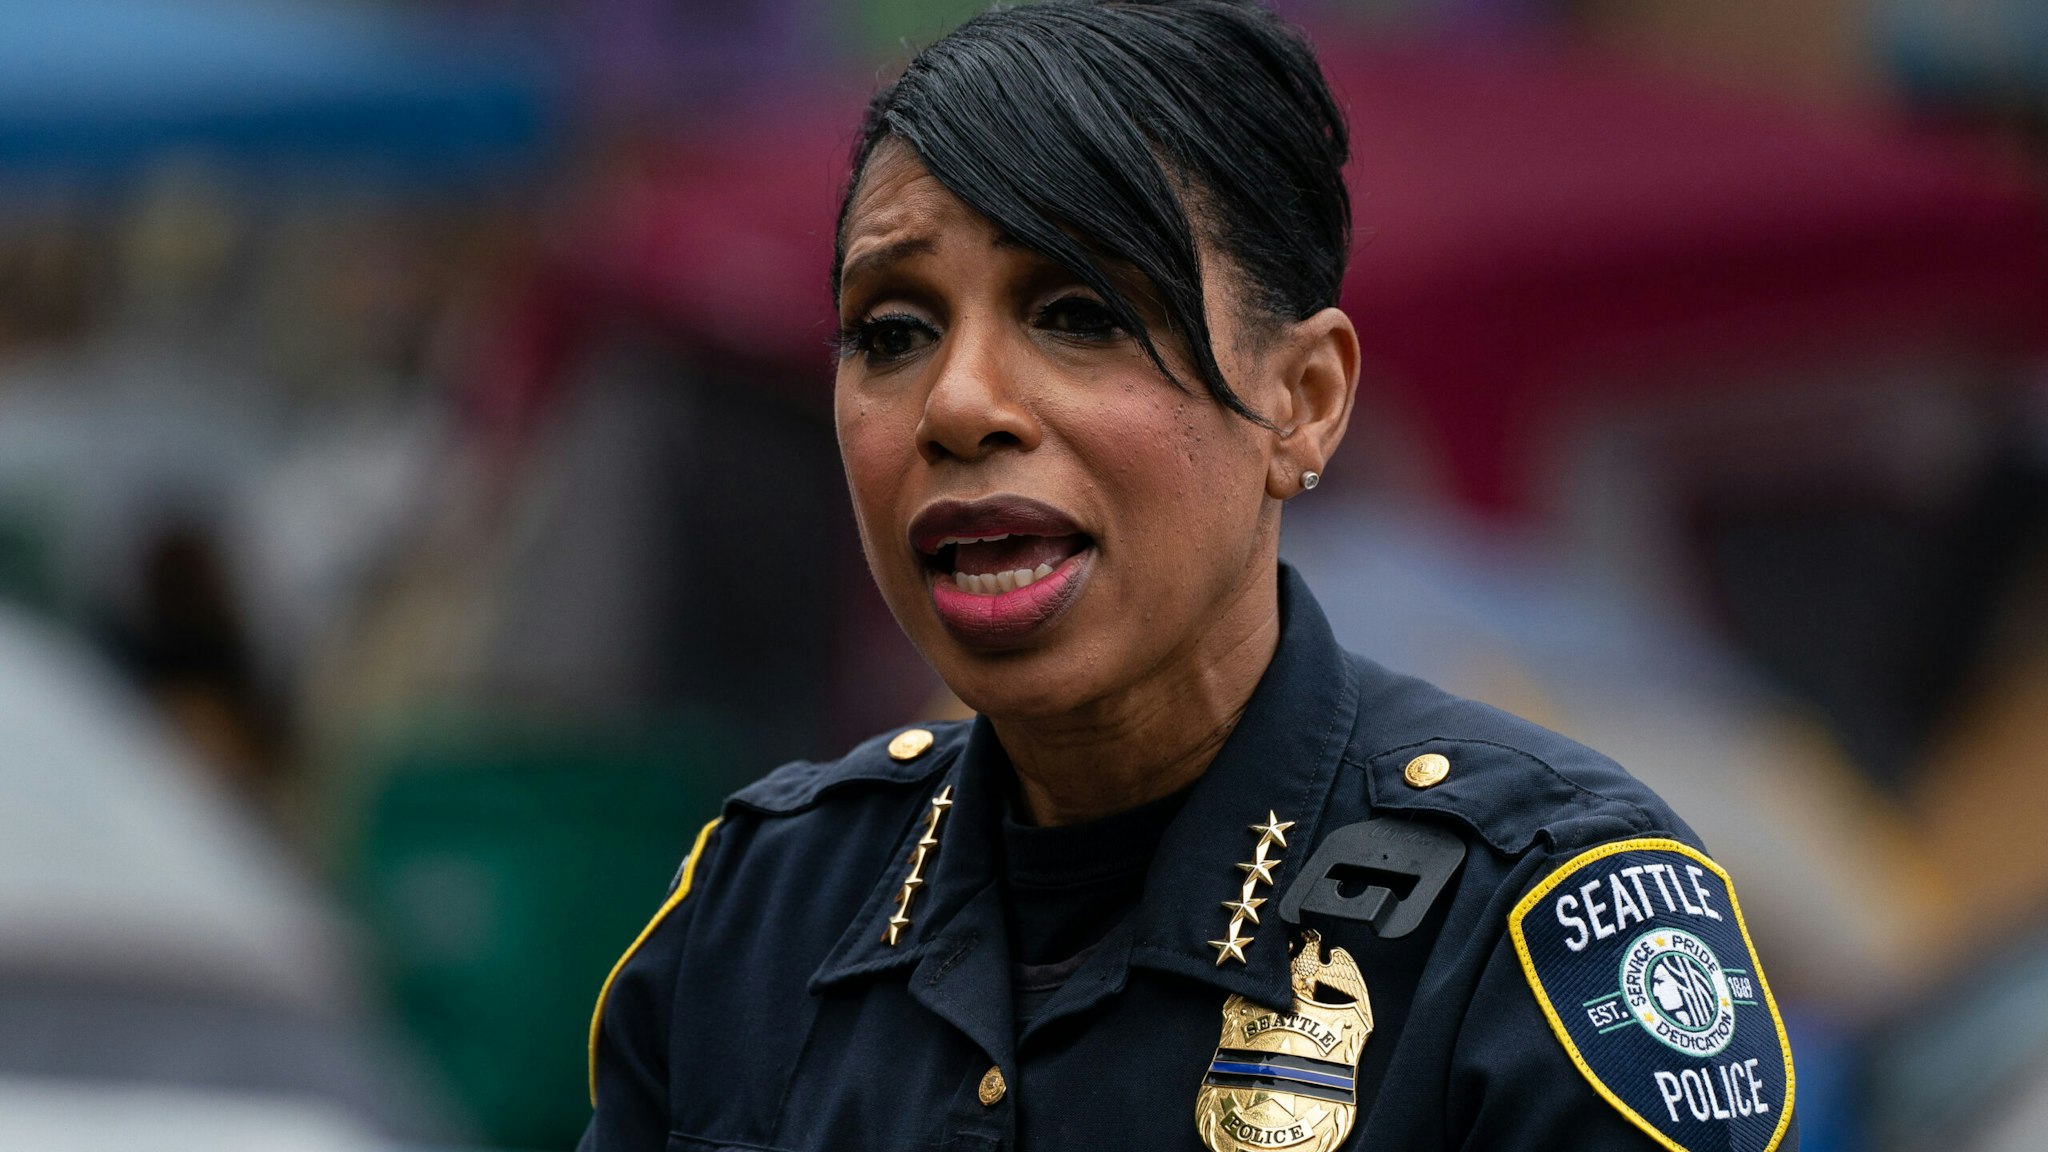 SEATTLE, WA - JUNE 29: Seattle Police Chief Carmen Best holds a press conference outside of the departments vacated East Precinct in the area known as the Capitol Hill Organized Protest (CHOP) on June 29, 2020 in Seattle, Washington. The press conference was held near the site of an early morning shooting that left one person dead and one in critical condition. "Enough is enough," she said. Four shootings in less than two weeks have taken place in the vicinity. (Photo by David Ryder/Getty Images)